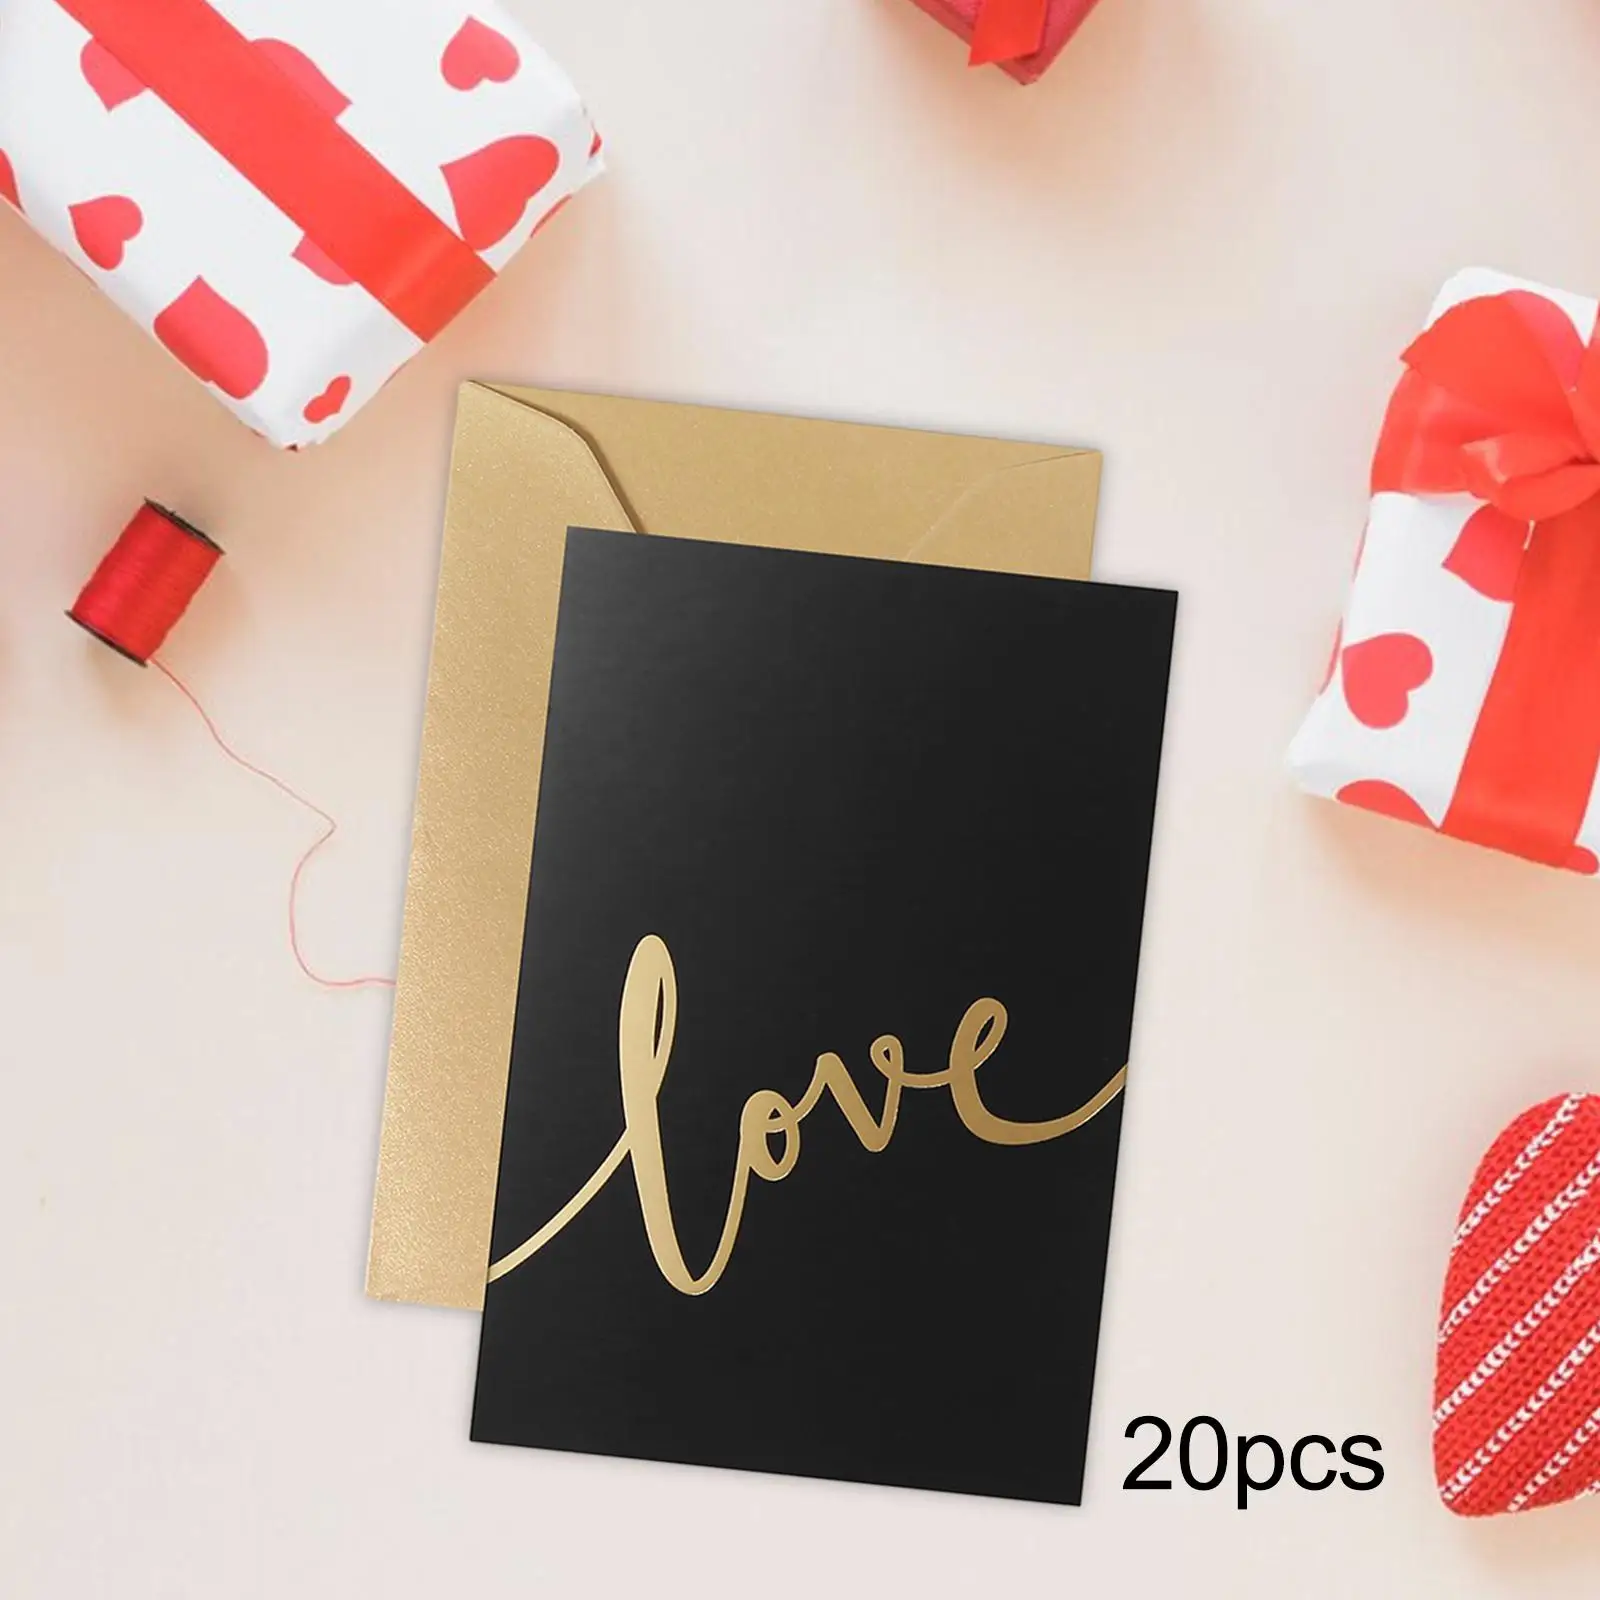 20Pcs Valentines Day Cards Retirement Card Birthday Card Holiday Card for Anniversary Party Fathers Day Festival Girlfriend